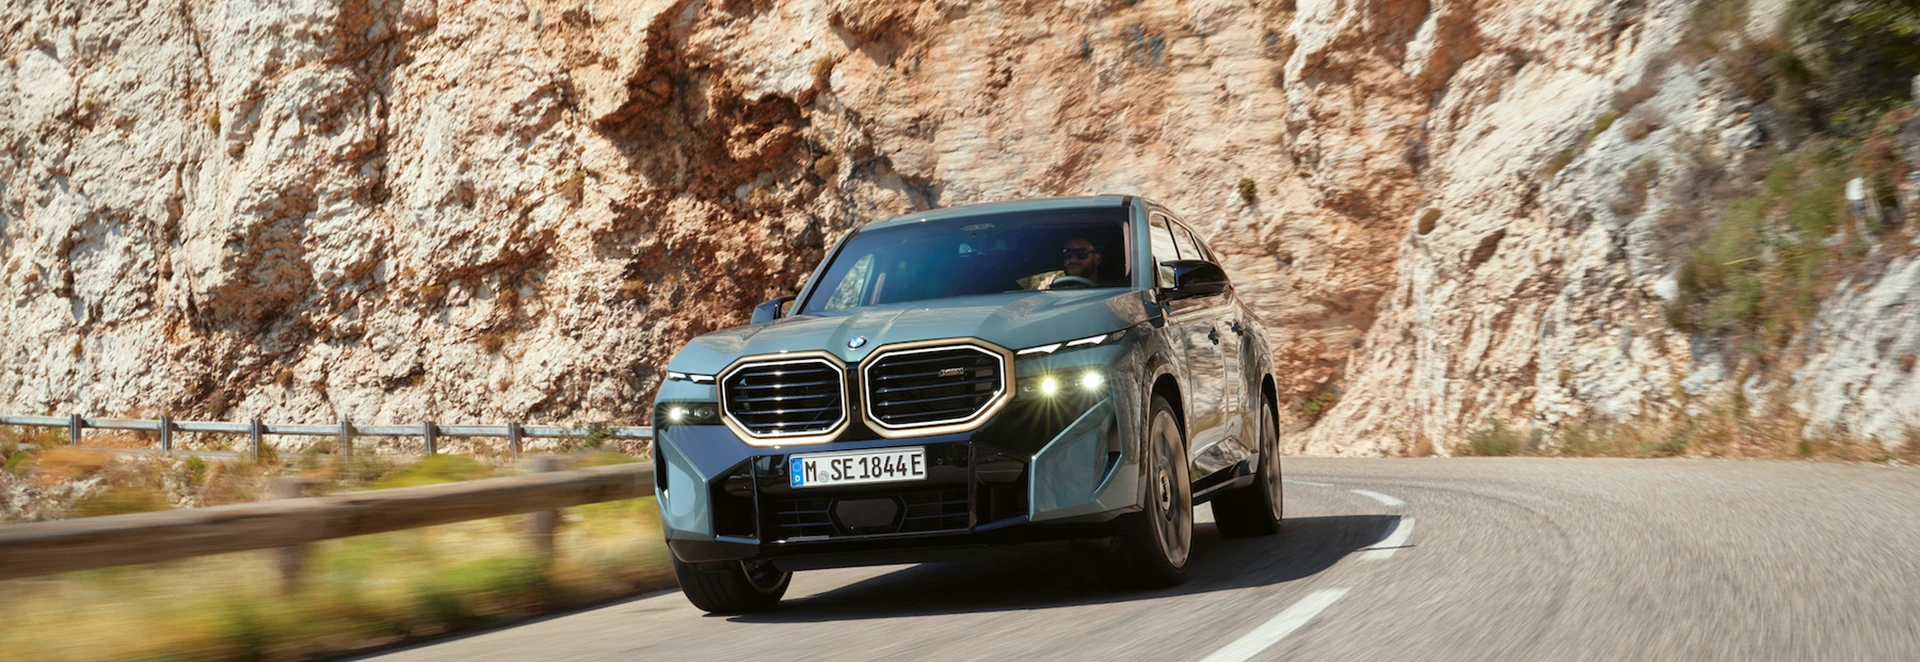 BMW XM revealed: 5 things you need to know 